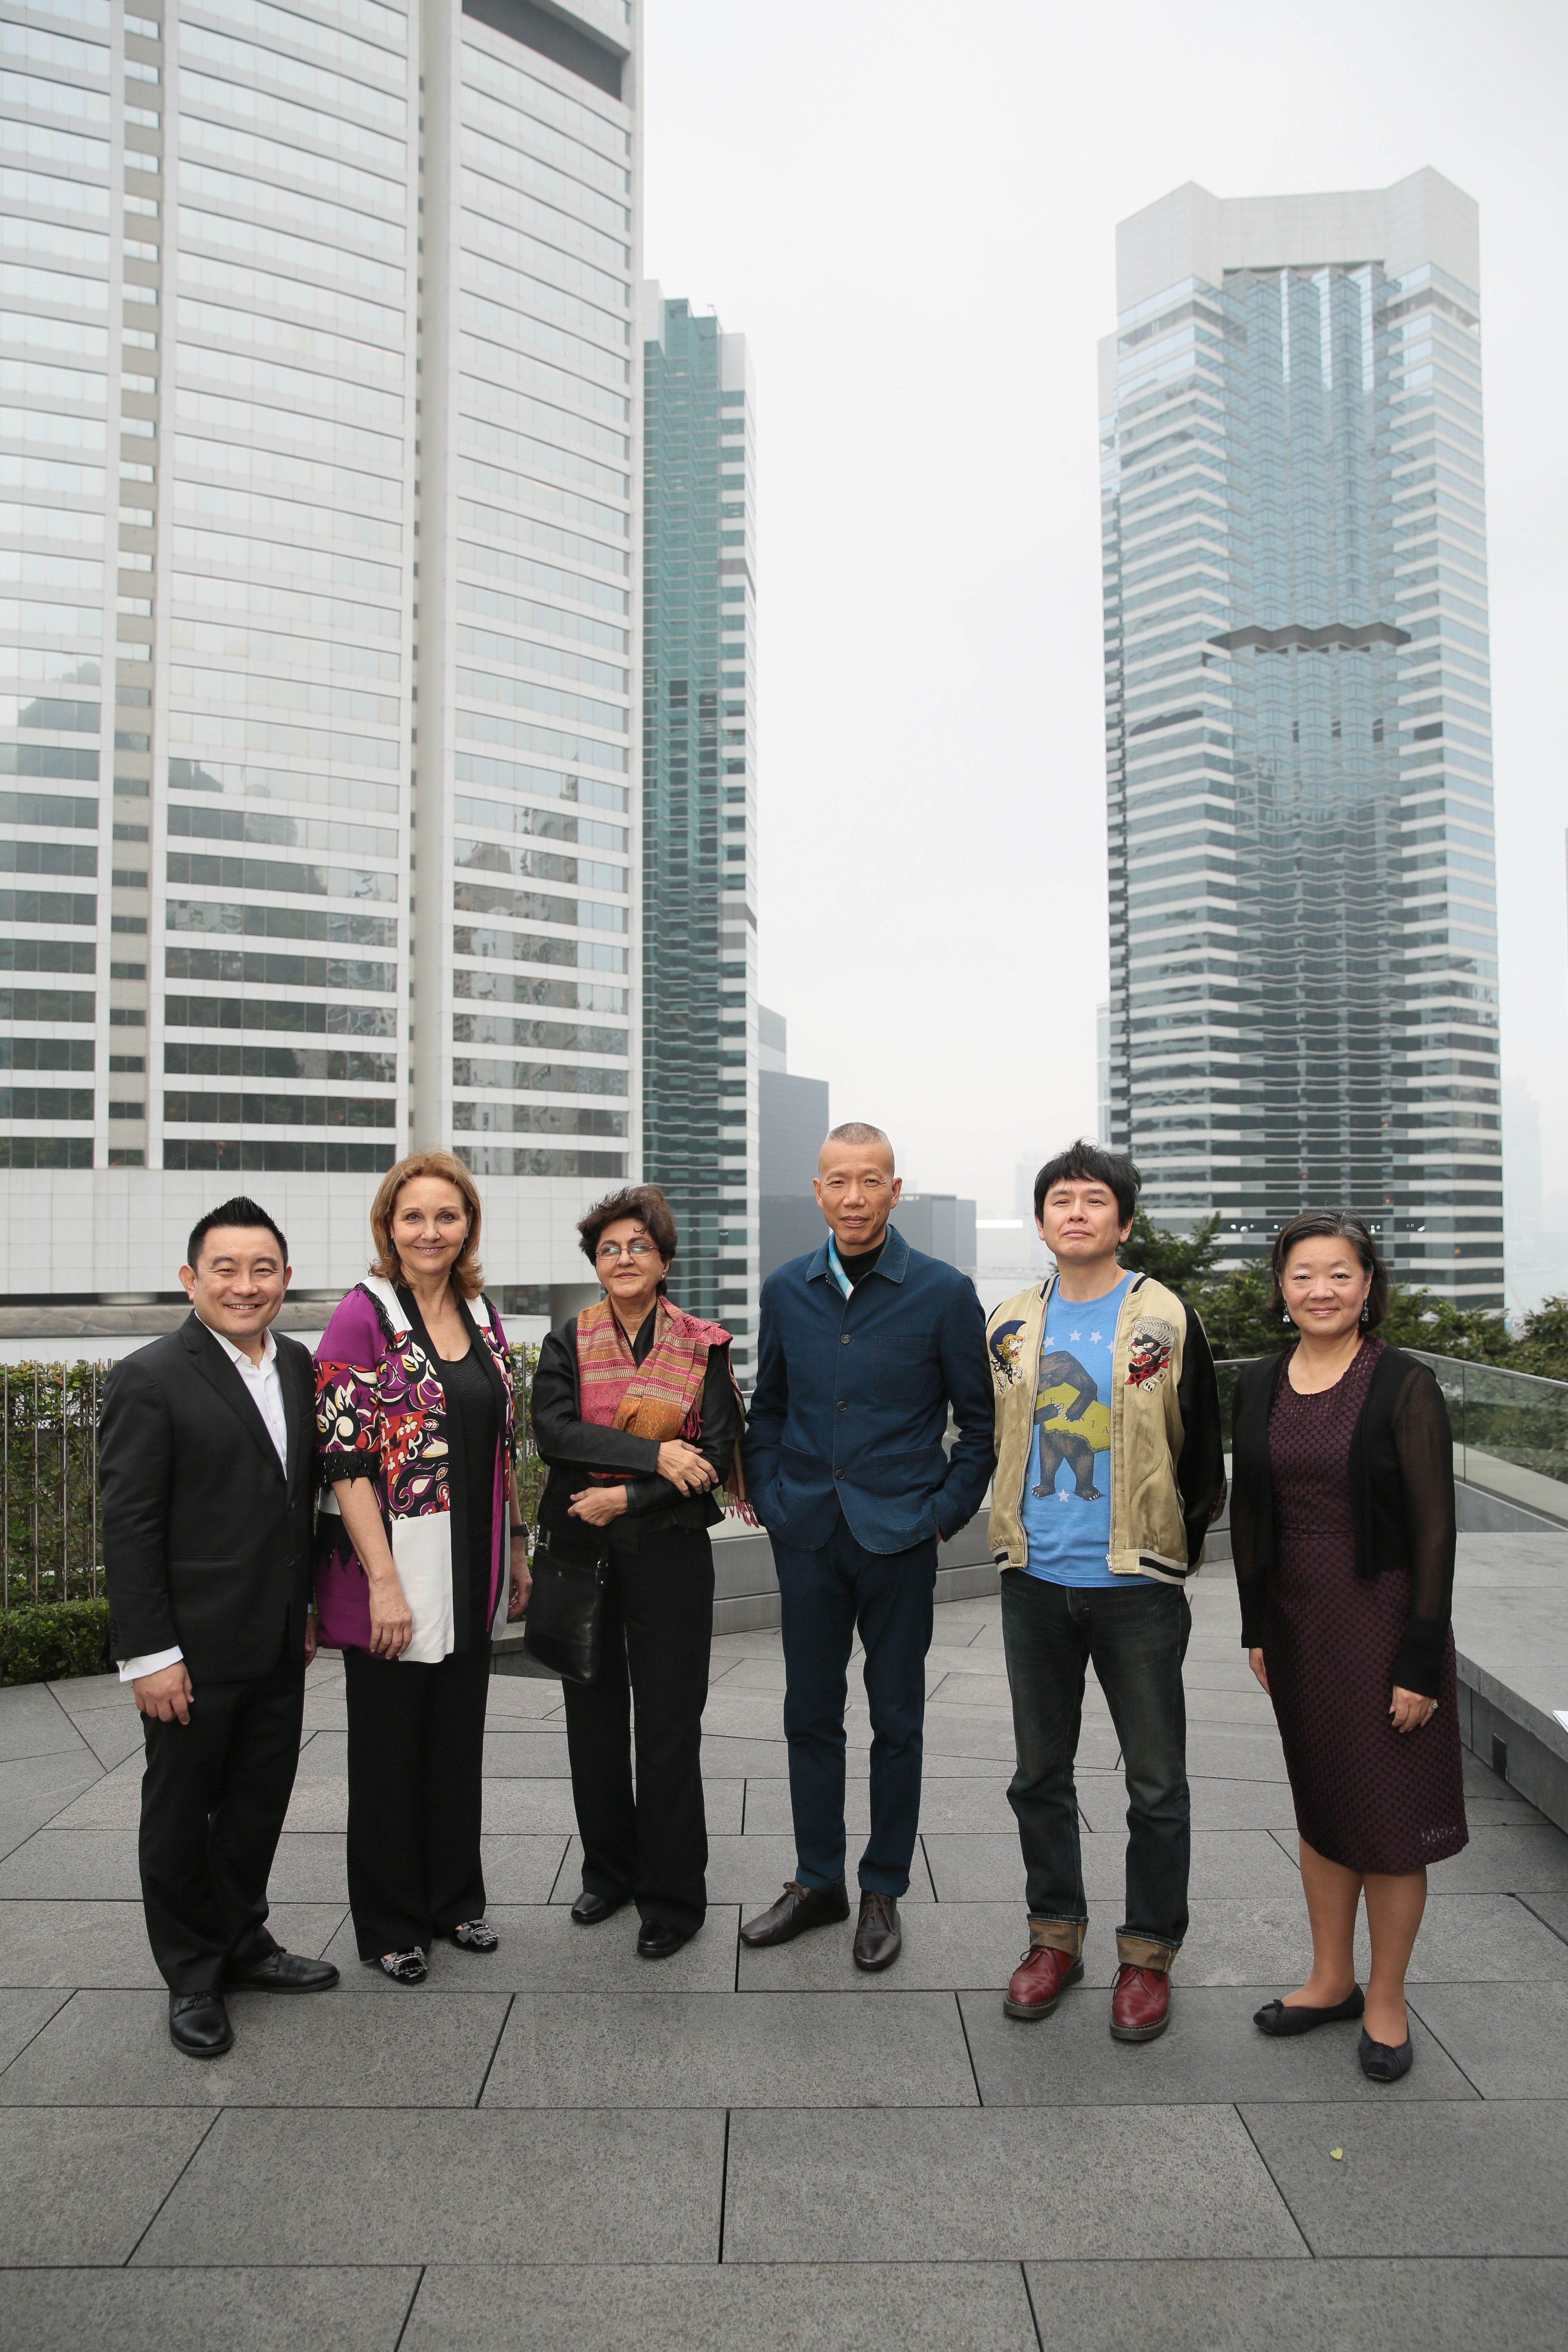 (From left to right) Boon Hui Tan, Asia Society Vice President of Global Arts and Cultural Programs and Director of Asia Society Museum; Josette Sheeran, President and CEO of Asia Society; Nalini Malani; Cai Guo-Qiang; Yoshitomo Nara; and S. Alice Mong, Executive Director, Asia Society Hong Kong Center.